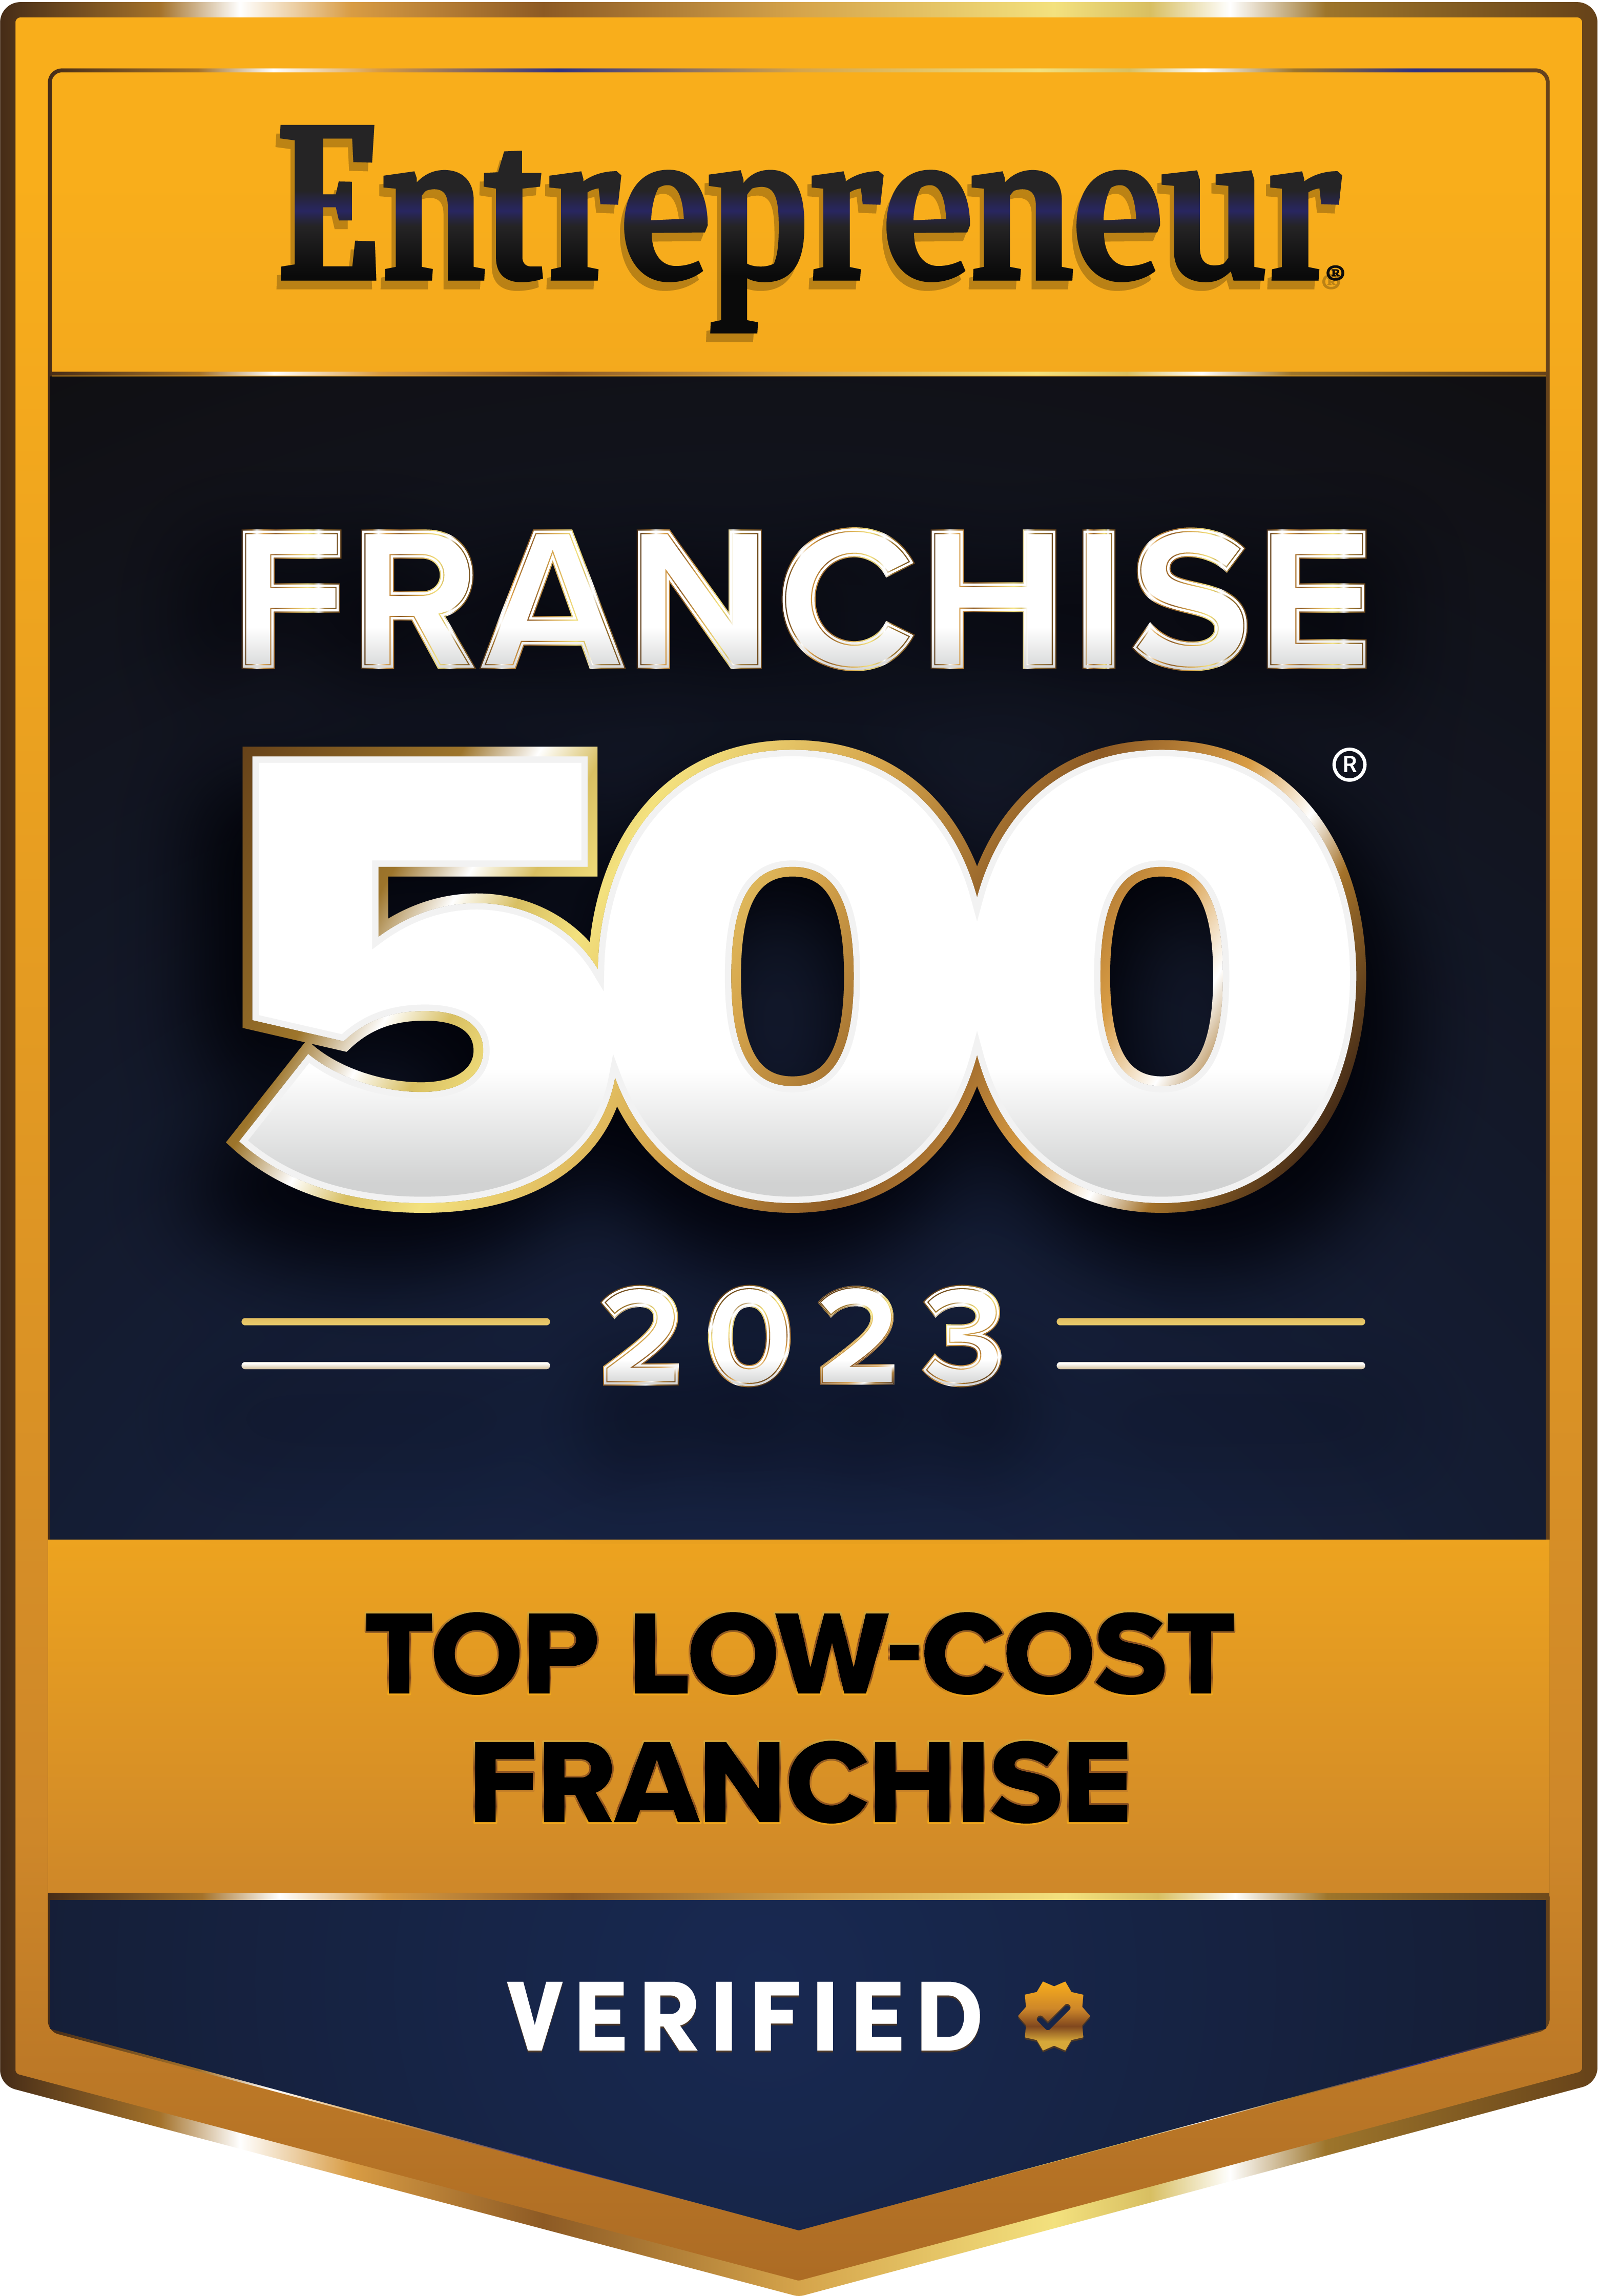 Grand Welcome Named a Top Low Cost Franchise in 2023 by Entrepreneur